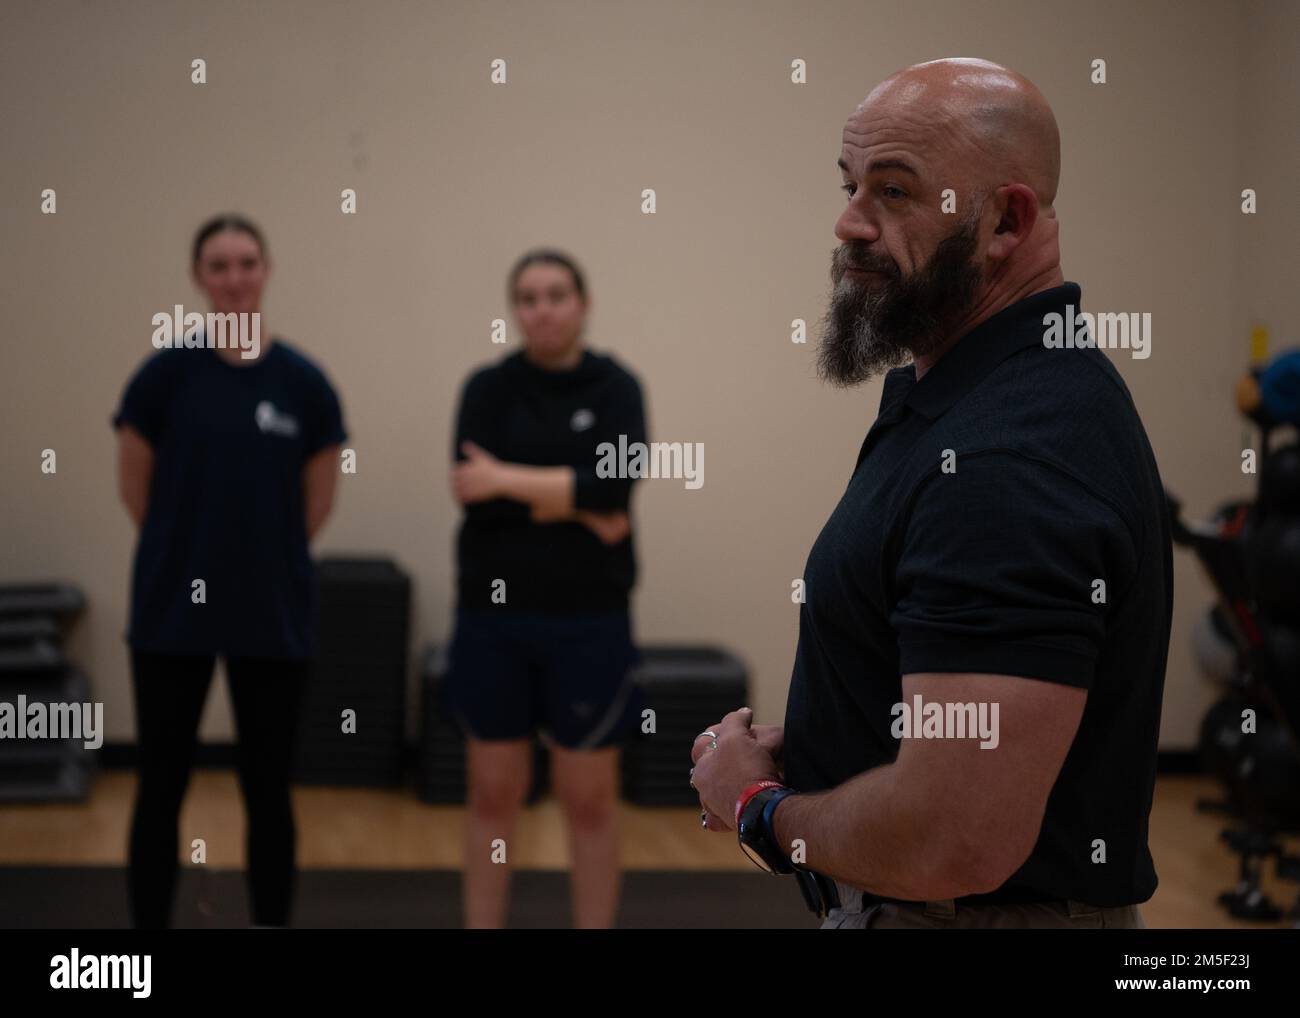 Billy Matheny, a 509th Security Forces Squadron training instructor, speaks during a women’s self-defense class last month at Whiteman Air Force Base, Missouri. At the end of the class Matheny answered questions about defending yourself with or against weapons and how to incapacitate an attacker. Stock Photo